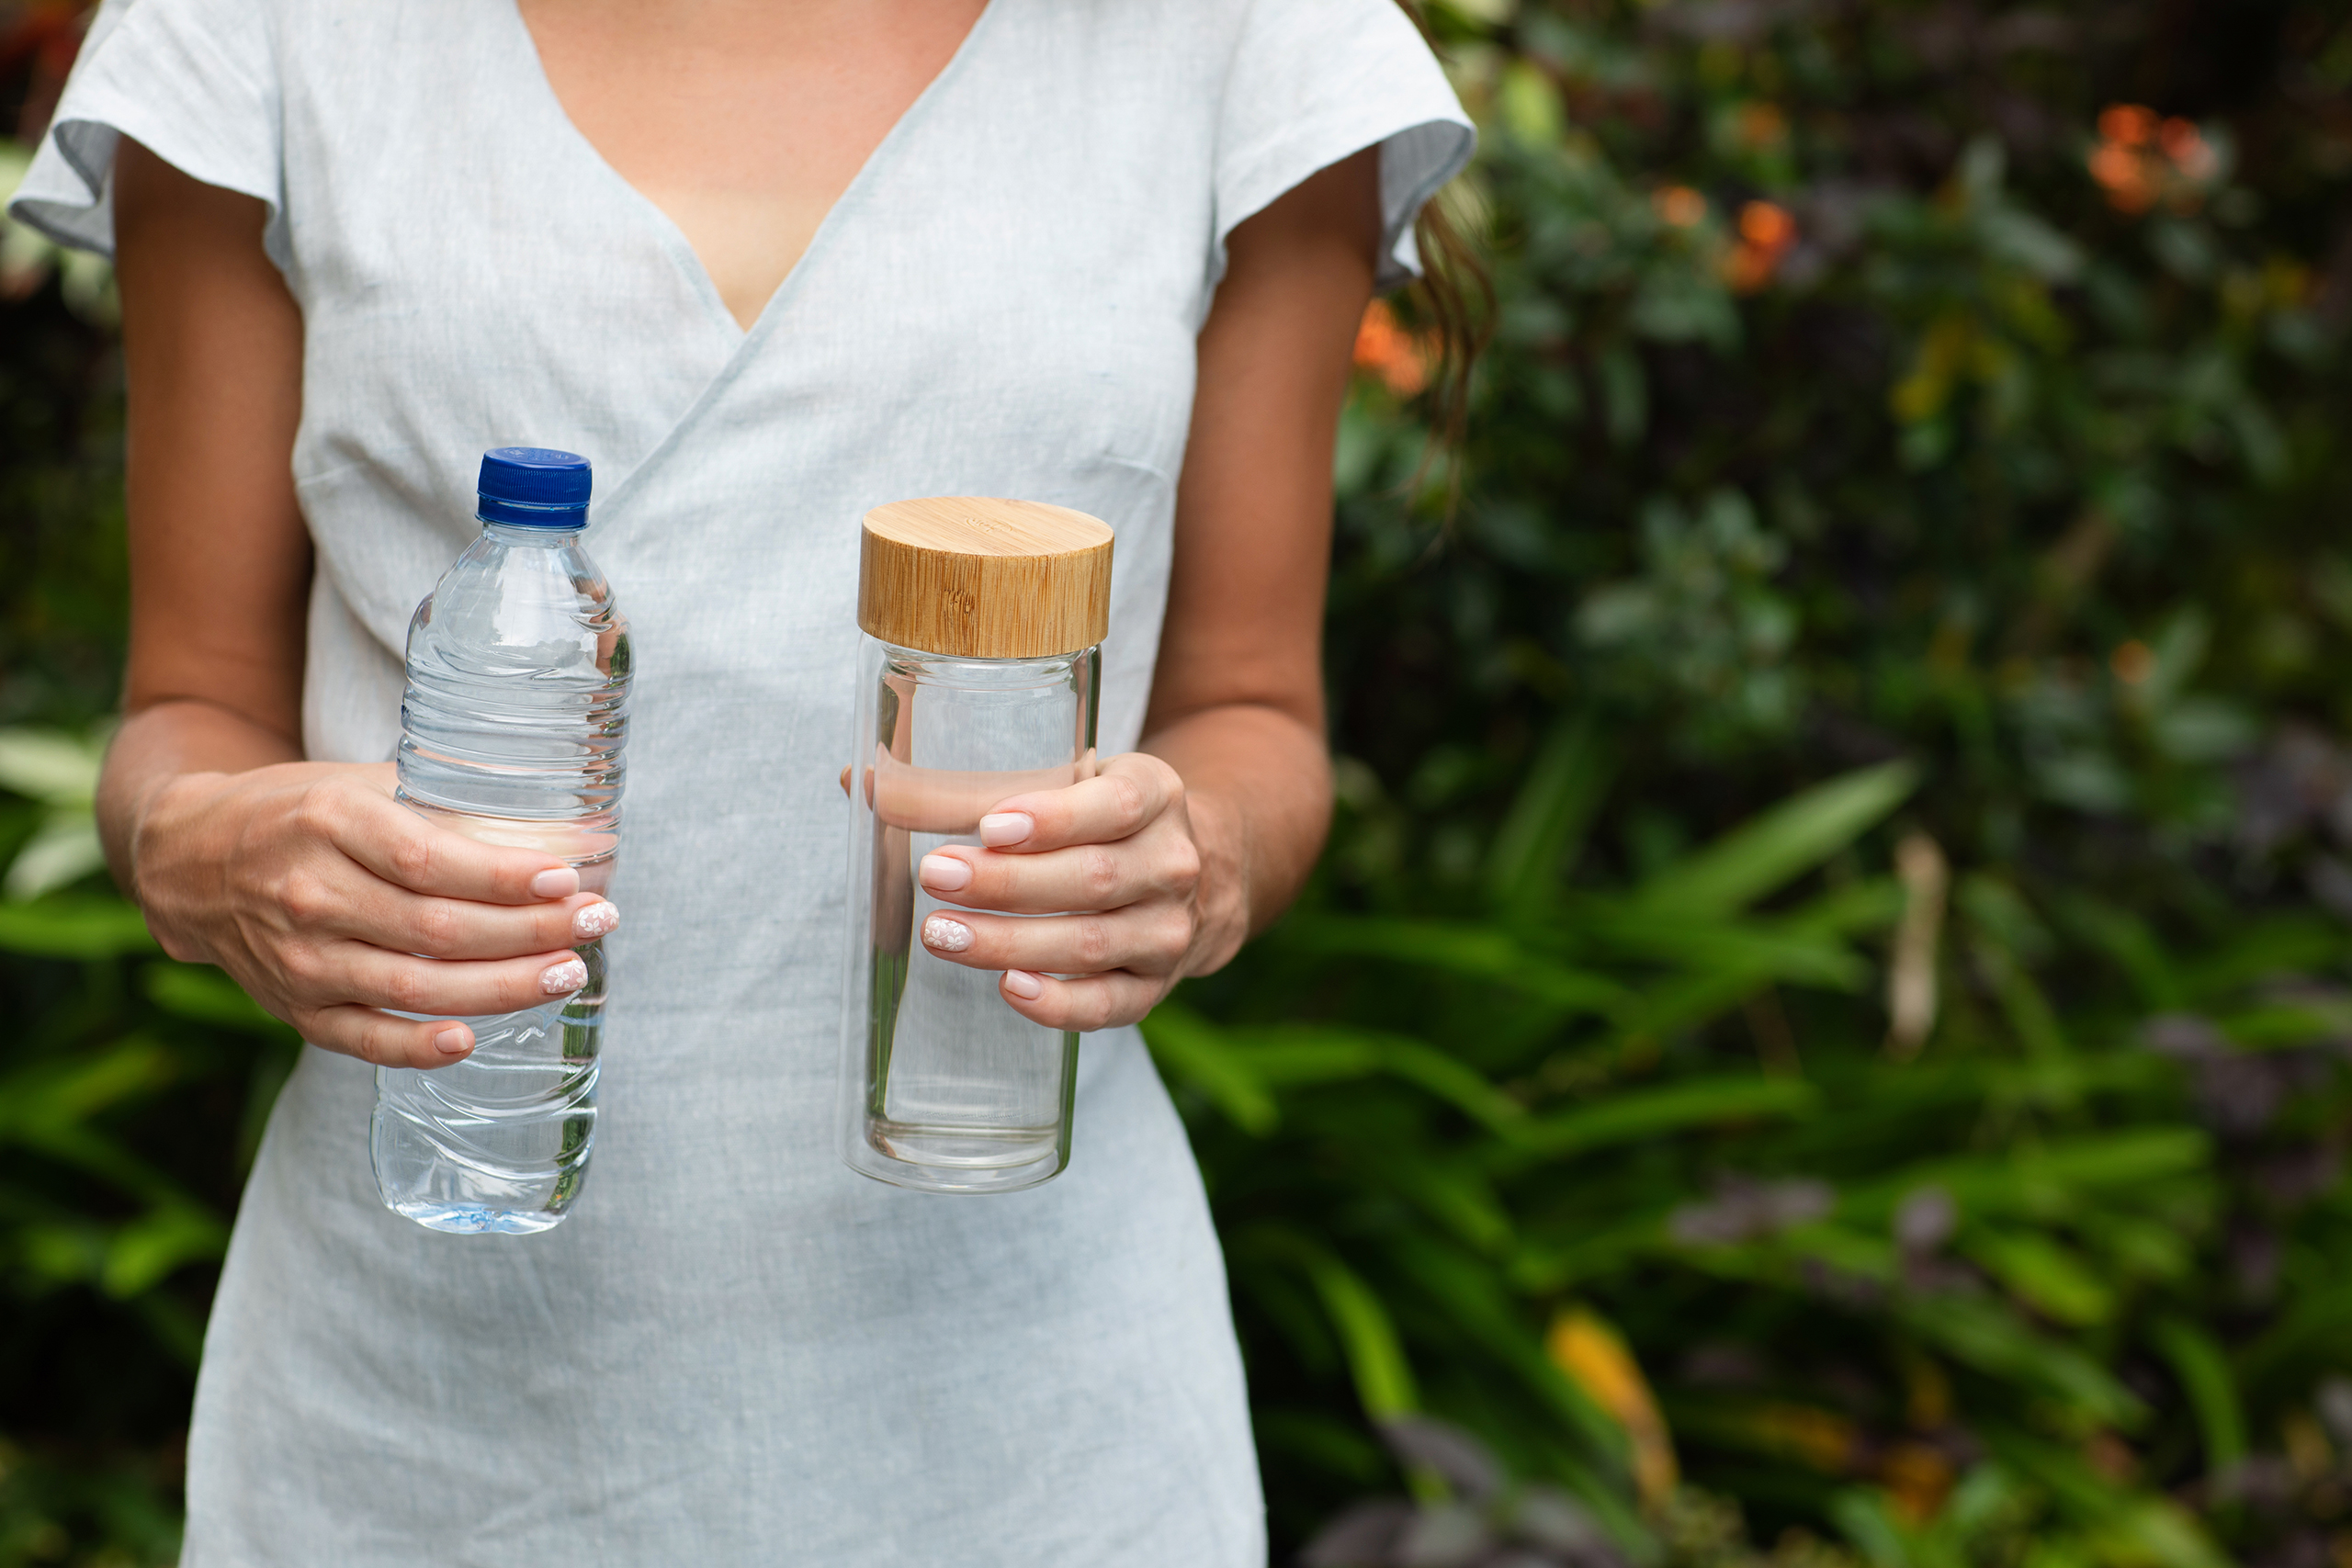 A recent study found that plastics may be more sustainable than some other materials in terms of the life cycle of the materials. This is an image of a woman holding a plastic bottle and a glass bottle.